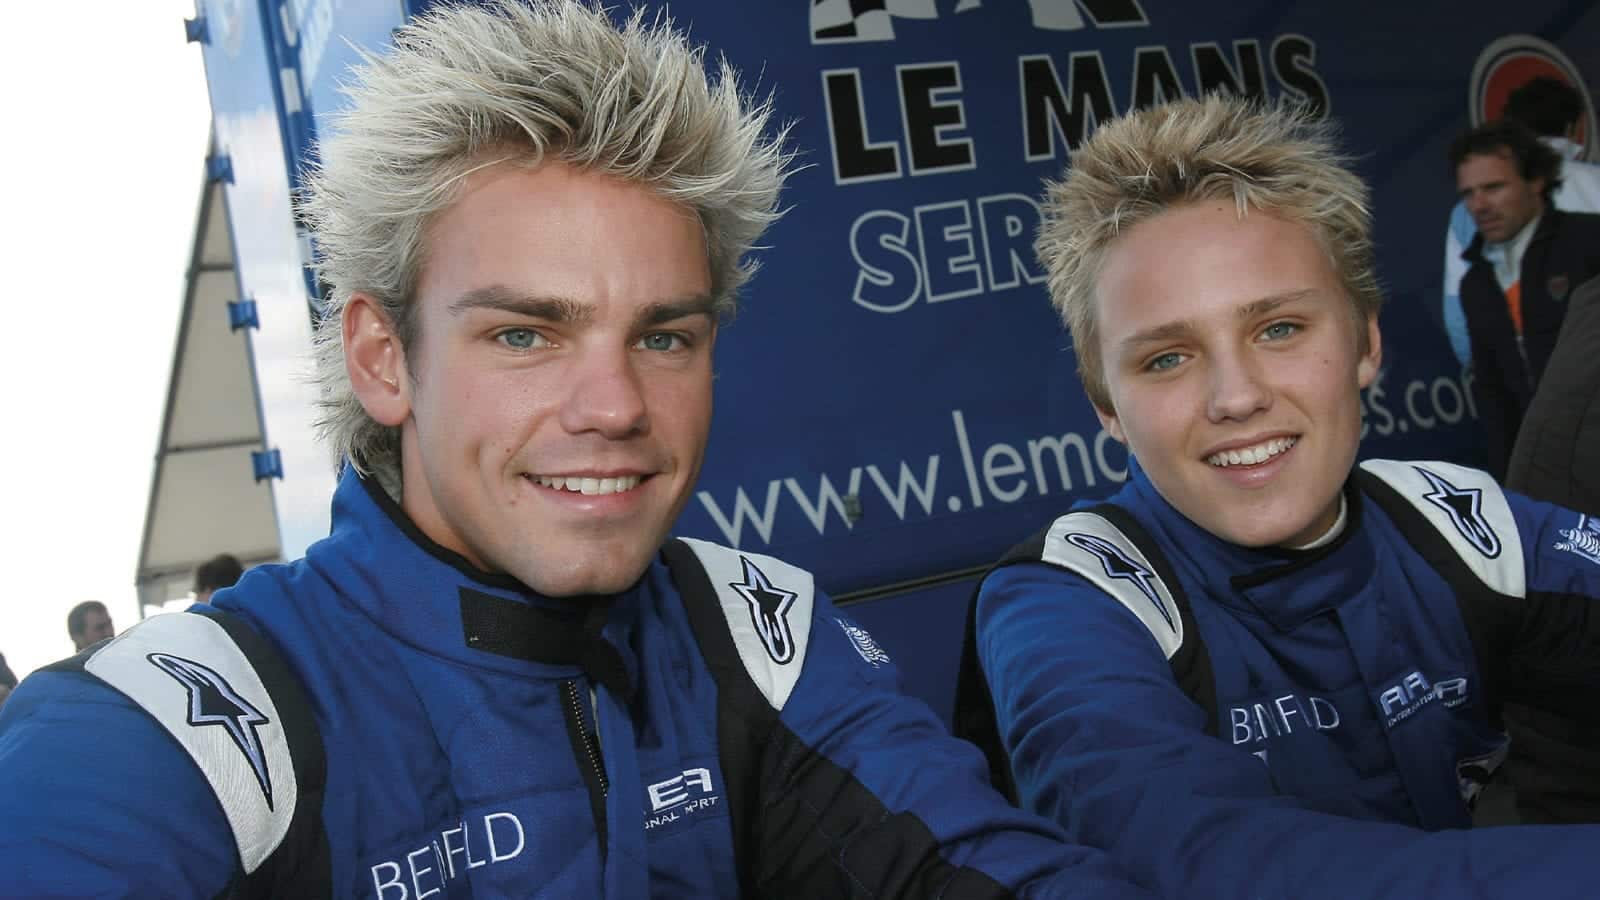 Tom and Max Chilton in 2007 when they were team-mates for Arena Motorsports Zytek in the Le Mans Series